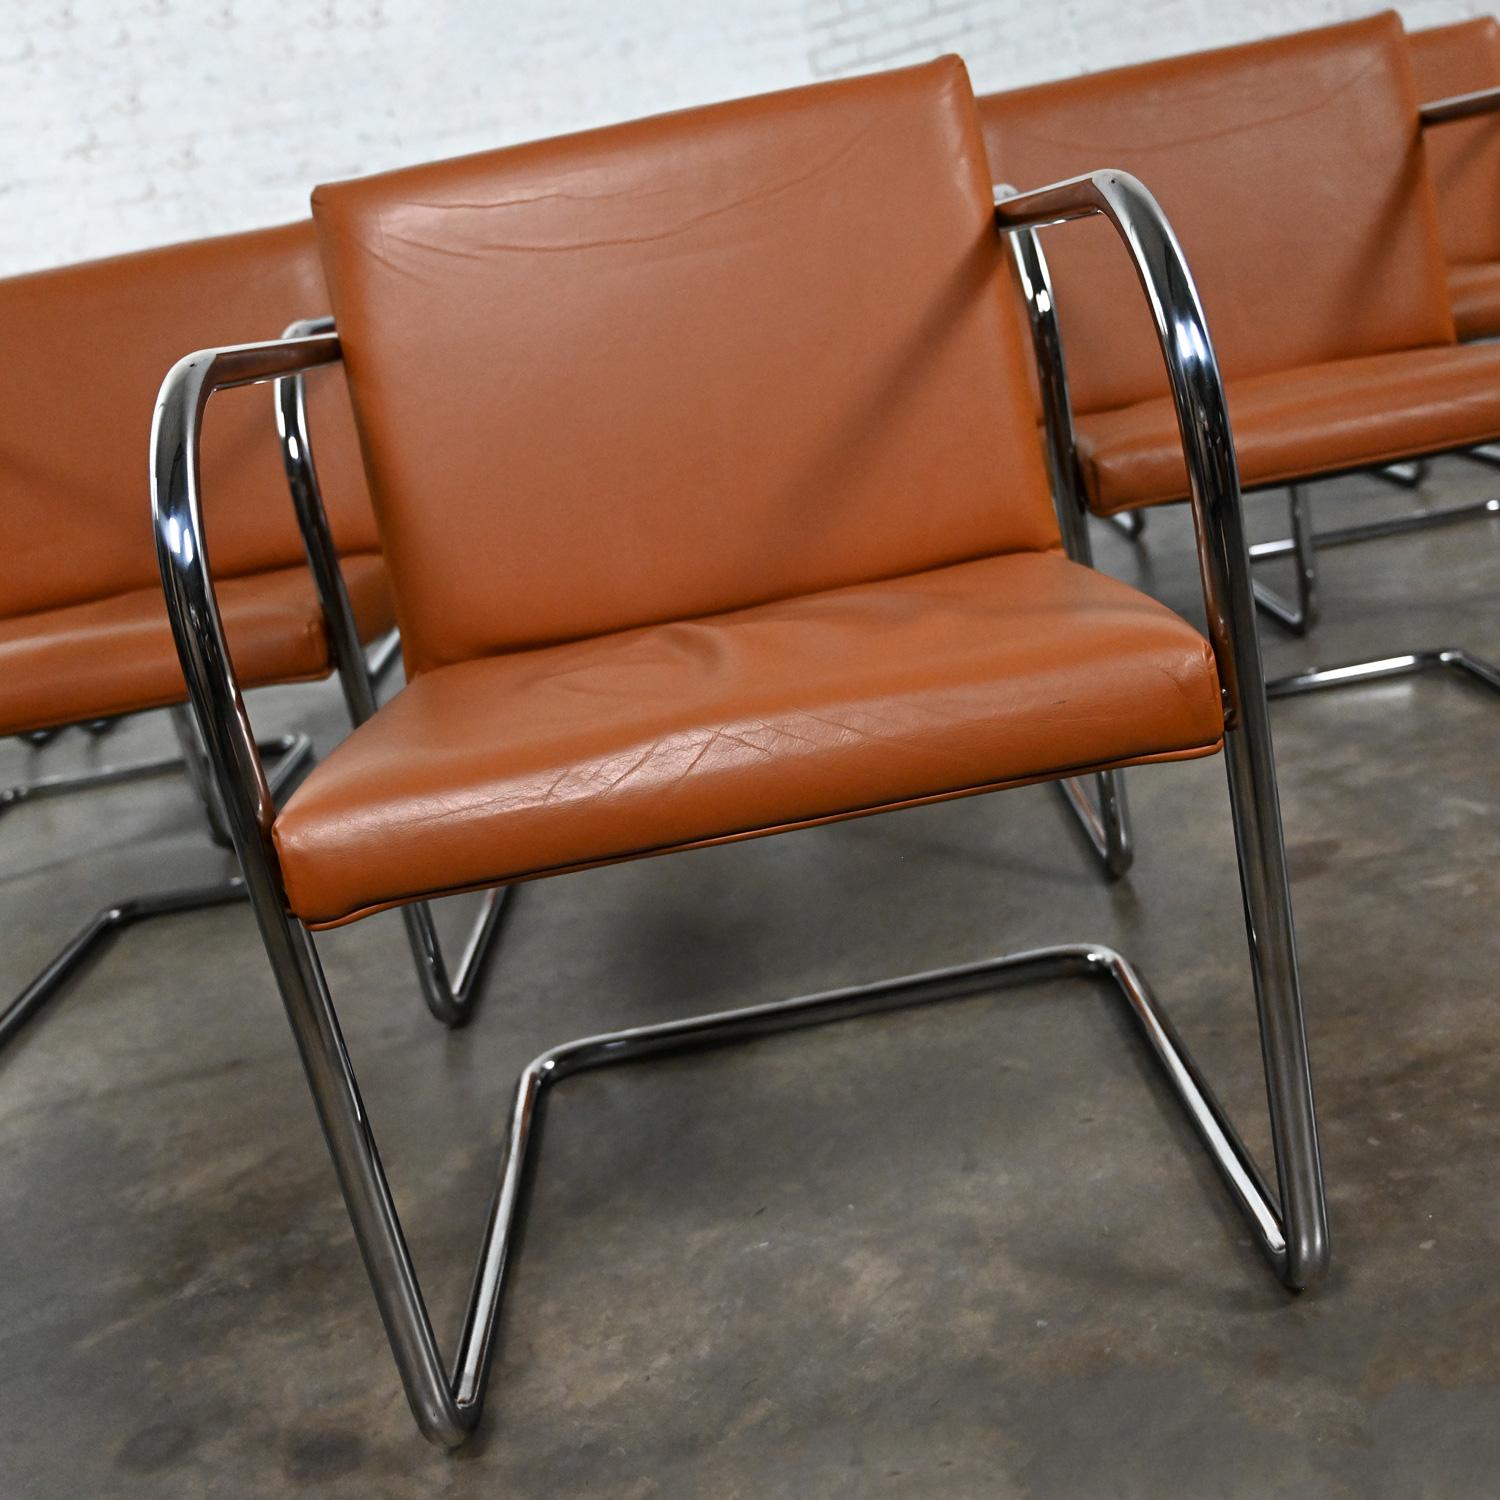 Thonet Bauhaus Brno Style Chairs Chrome & Cognac Leather Cantilever Set of 12  For Sale 9